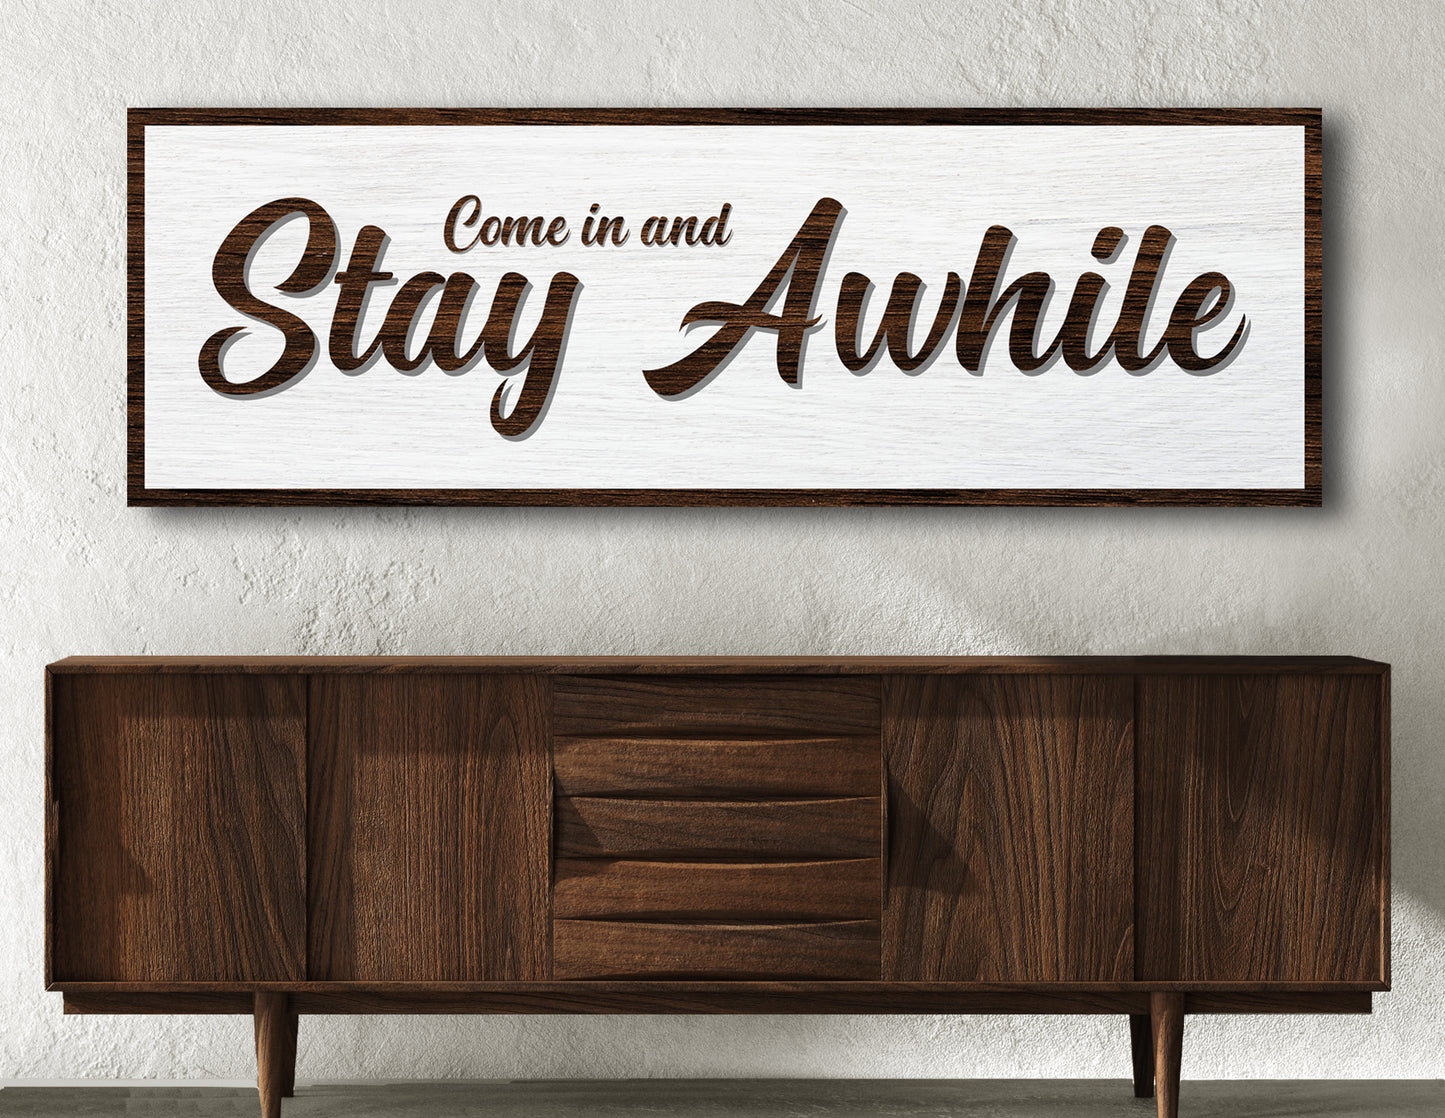 Come In & Stay Awhile Sign - Image by Tailored Canvases